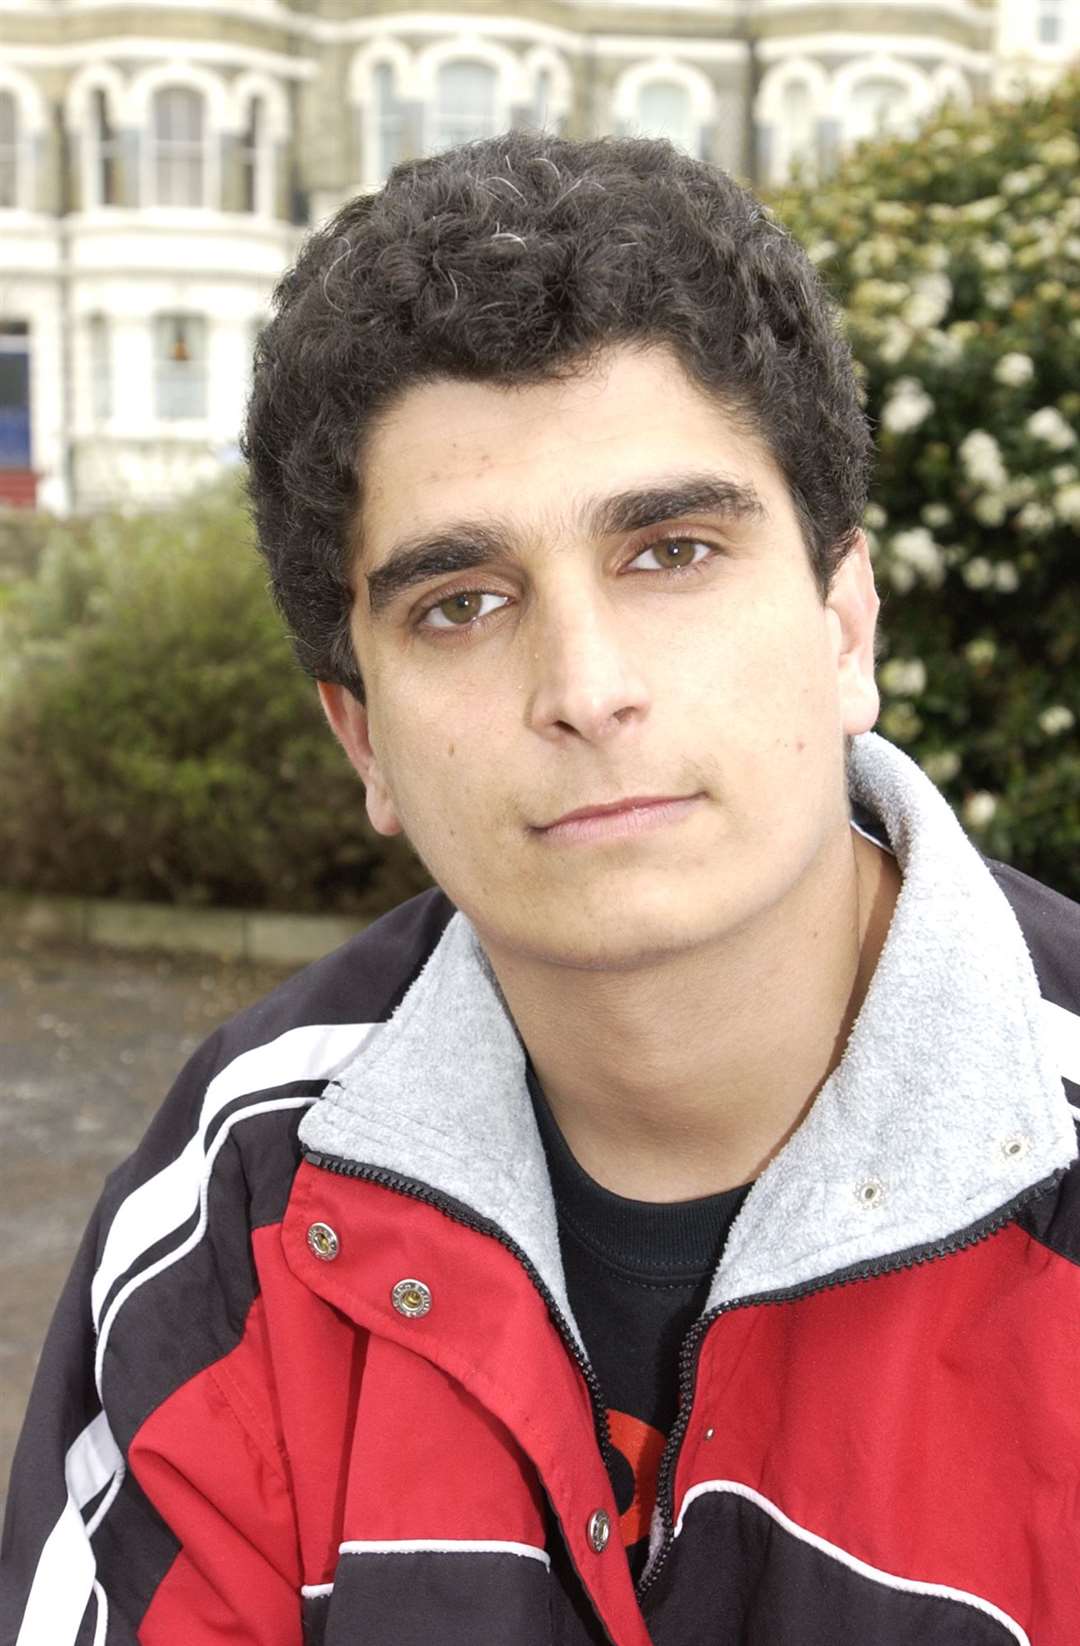 In 2003 Aram was working as a translator at the port of Dover